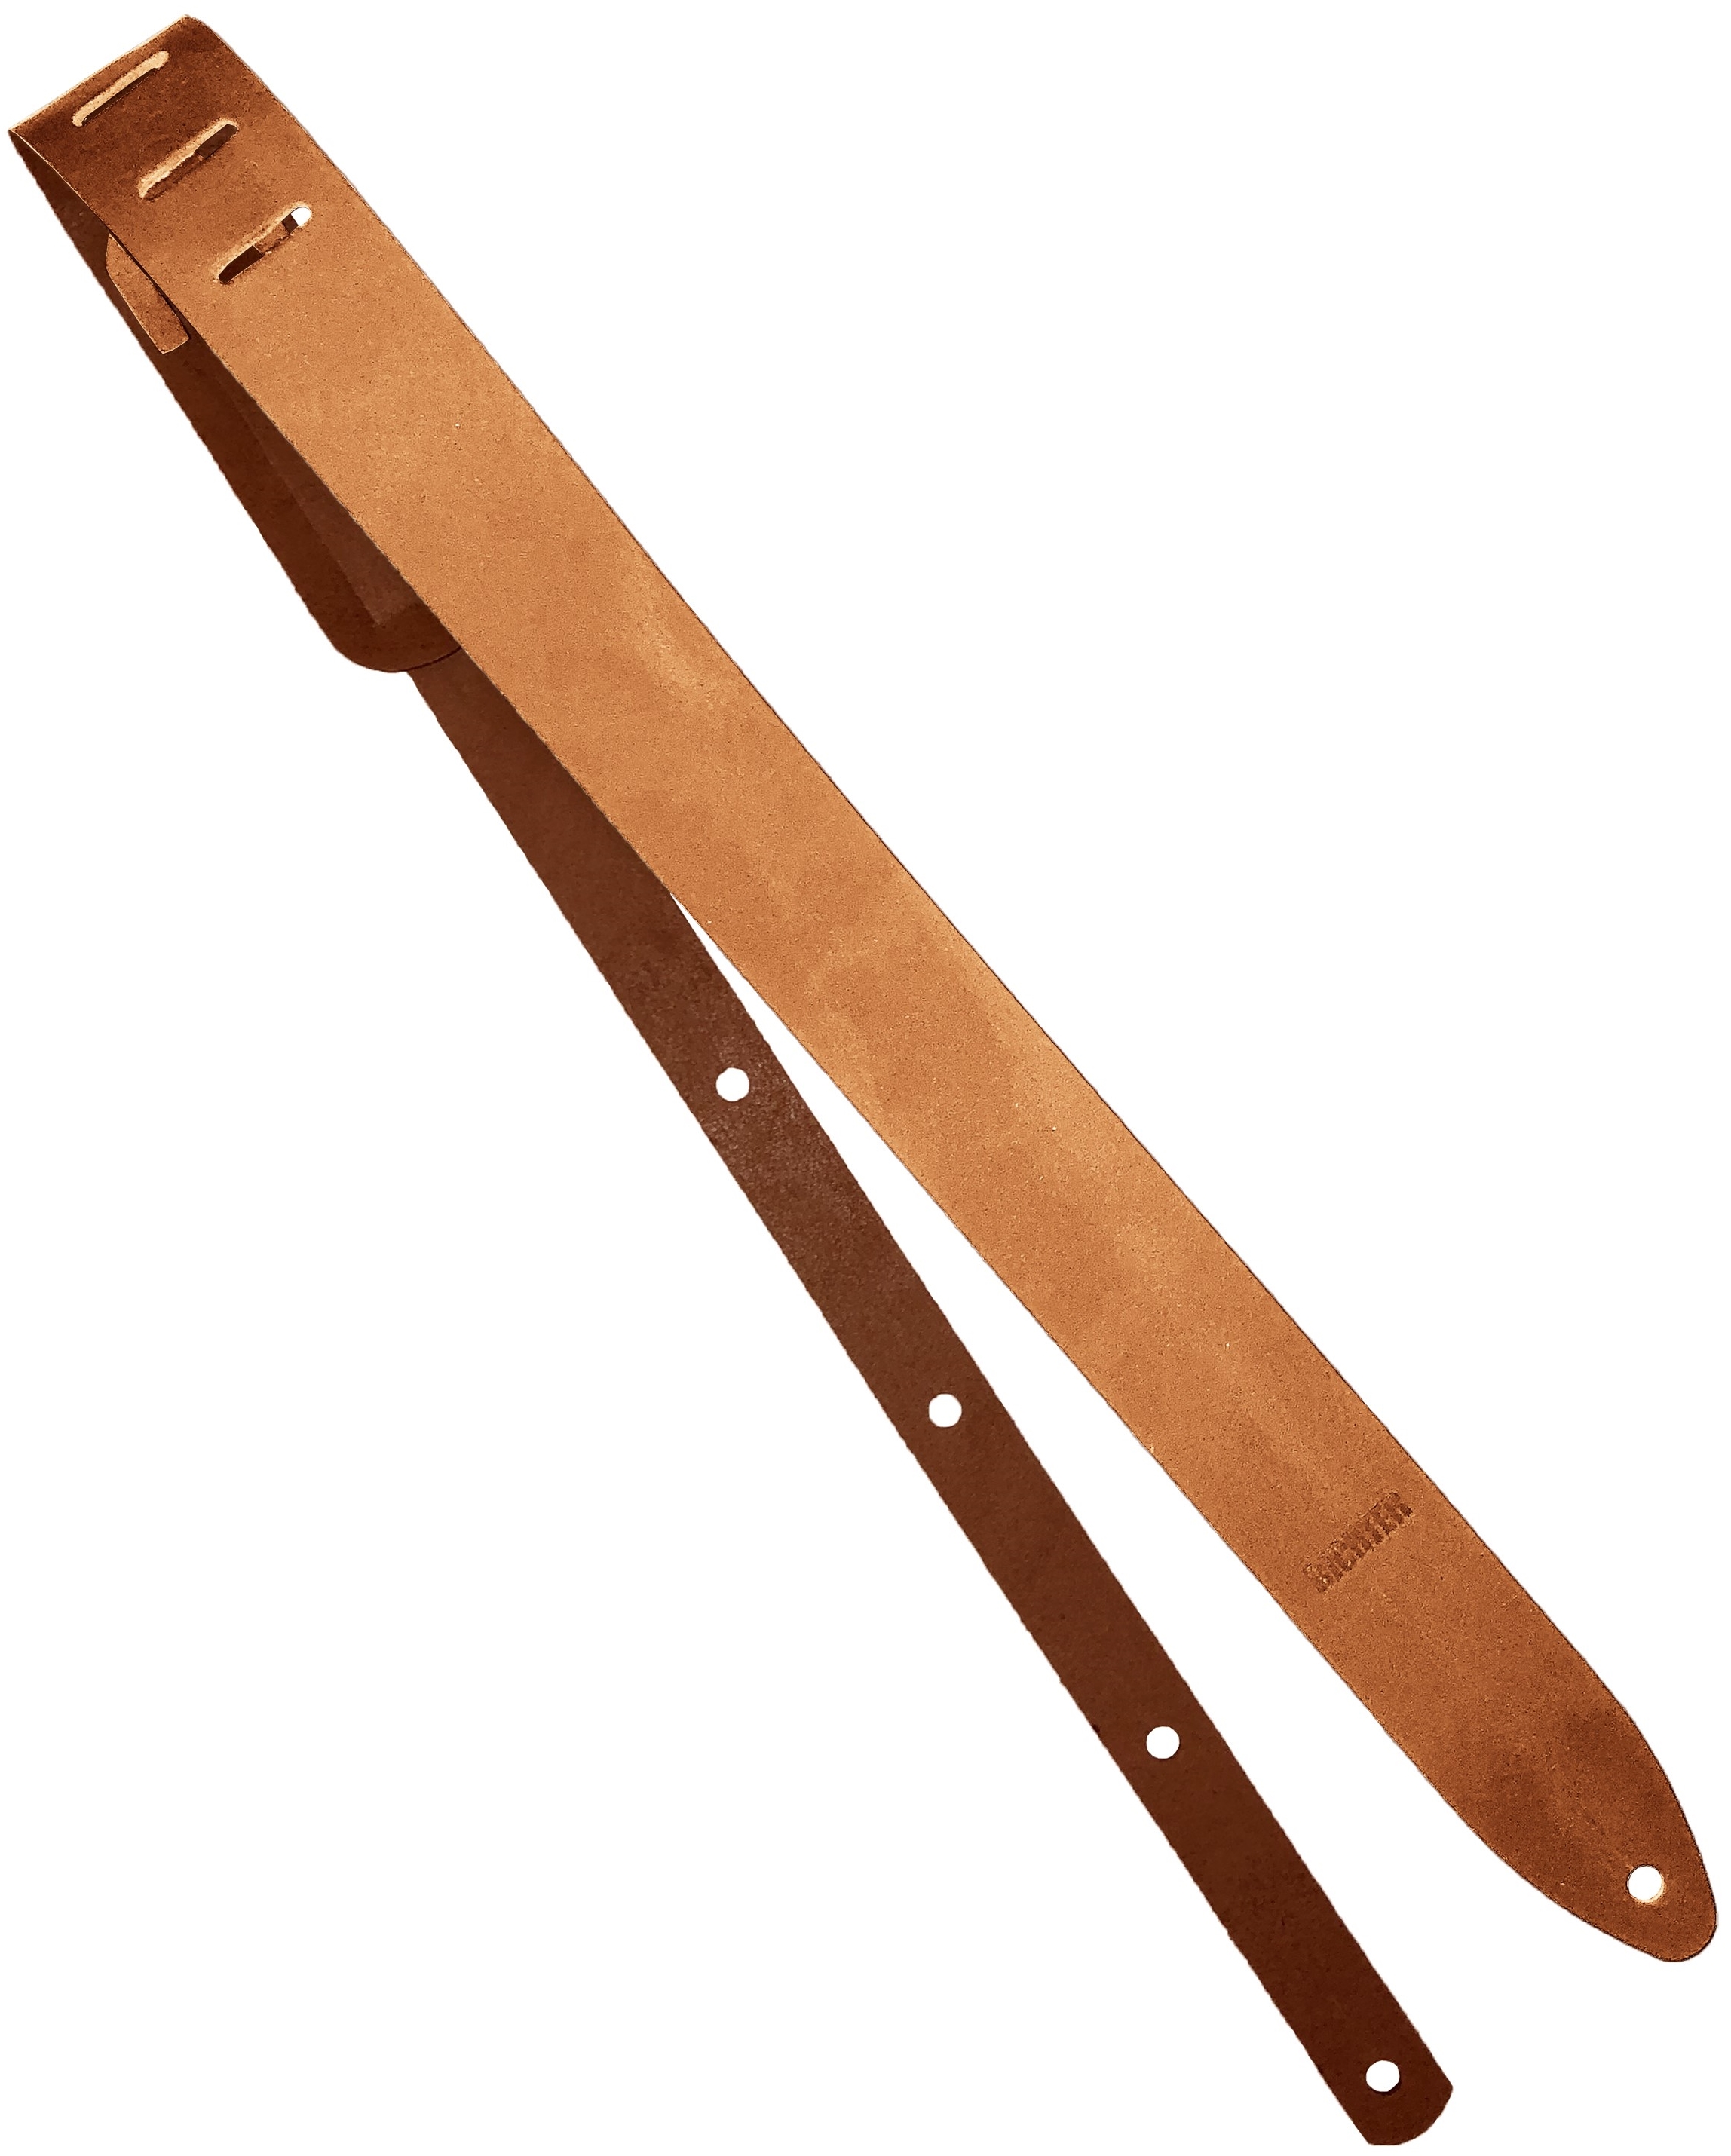 RICHTER Ukulele Strap Waxy Suede Natural